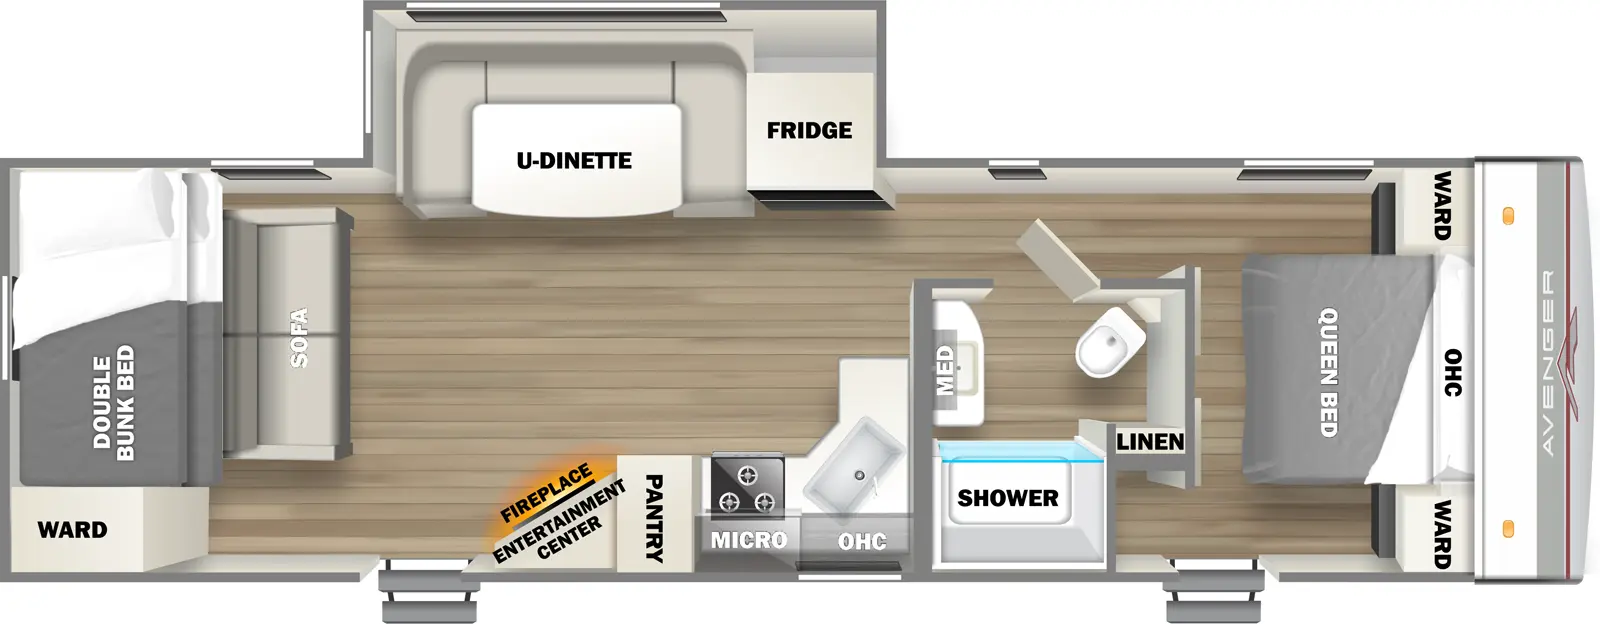 The 28BHS has one slideout and two entries. Interior layout front to back: foot-facing queen bed with overhead cabinet, wardrobe on each side, and entry door; door side full bathroom with linen closet; off-door side slideout with refrigerator and u-dinette; kitchen counter wraps from inner wall to door side with sink, overhead cabinet, microwave, cooktop, pantry, angled entertainment center with fireplace below, and second entry; rear double bunk beds and wardrobe with sofa in front.